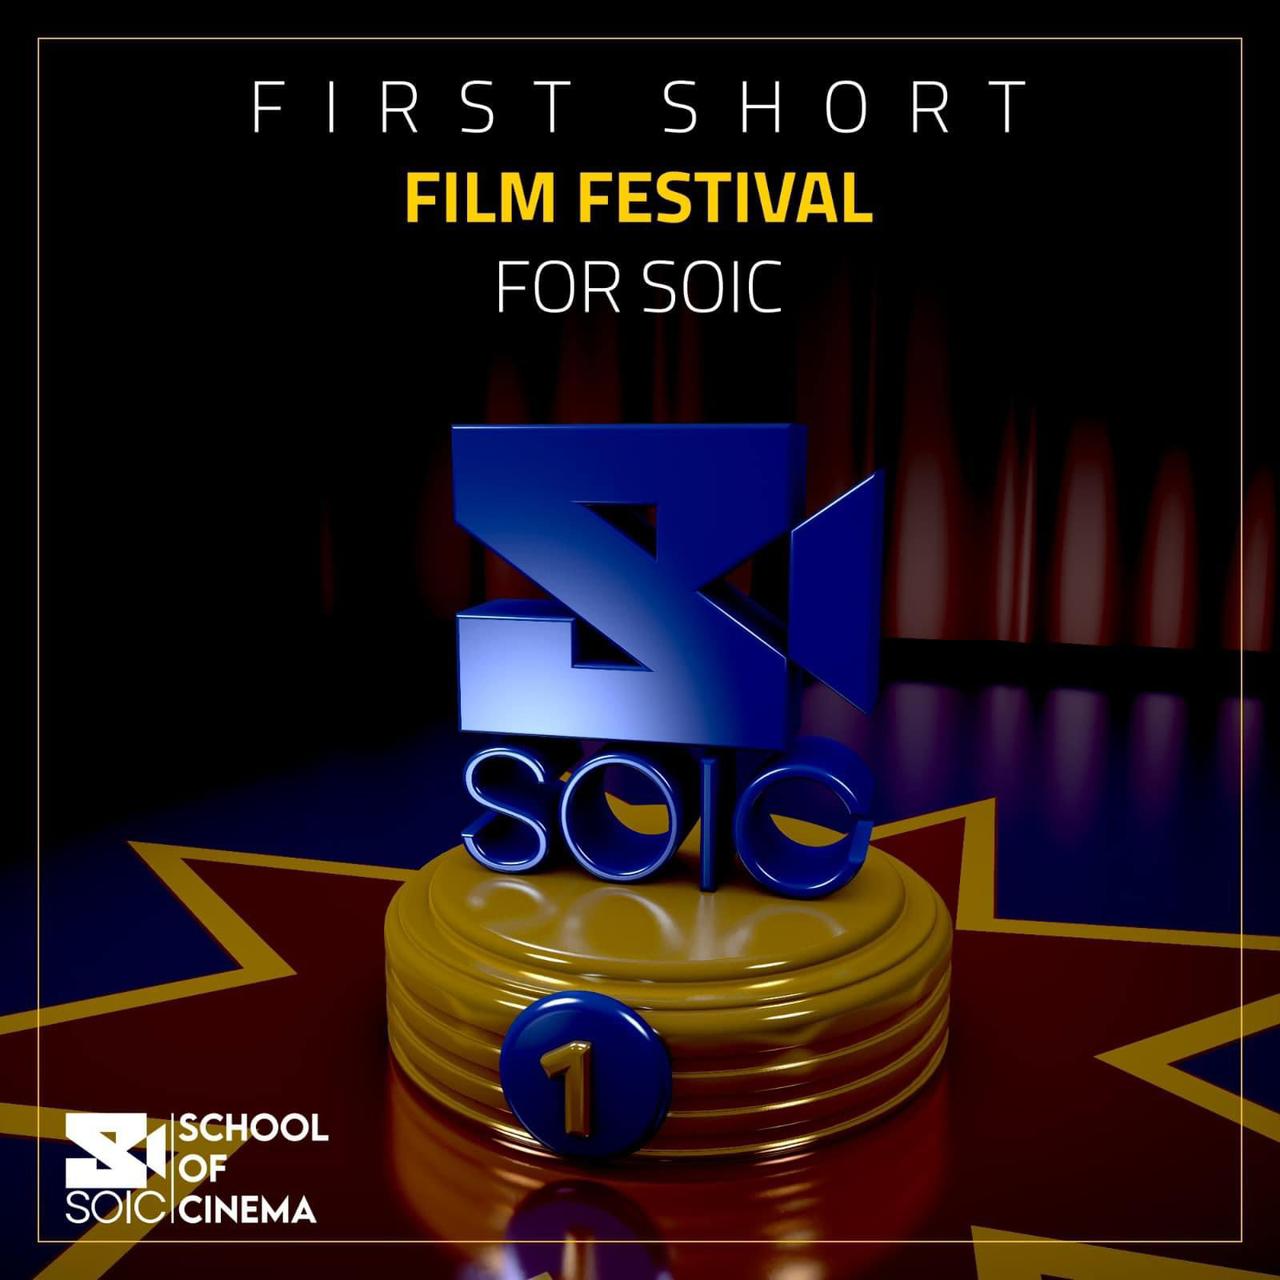 The first SOIC Film Festival